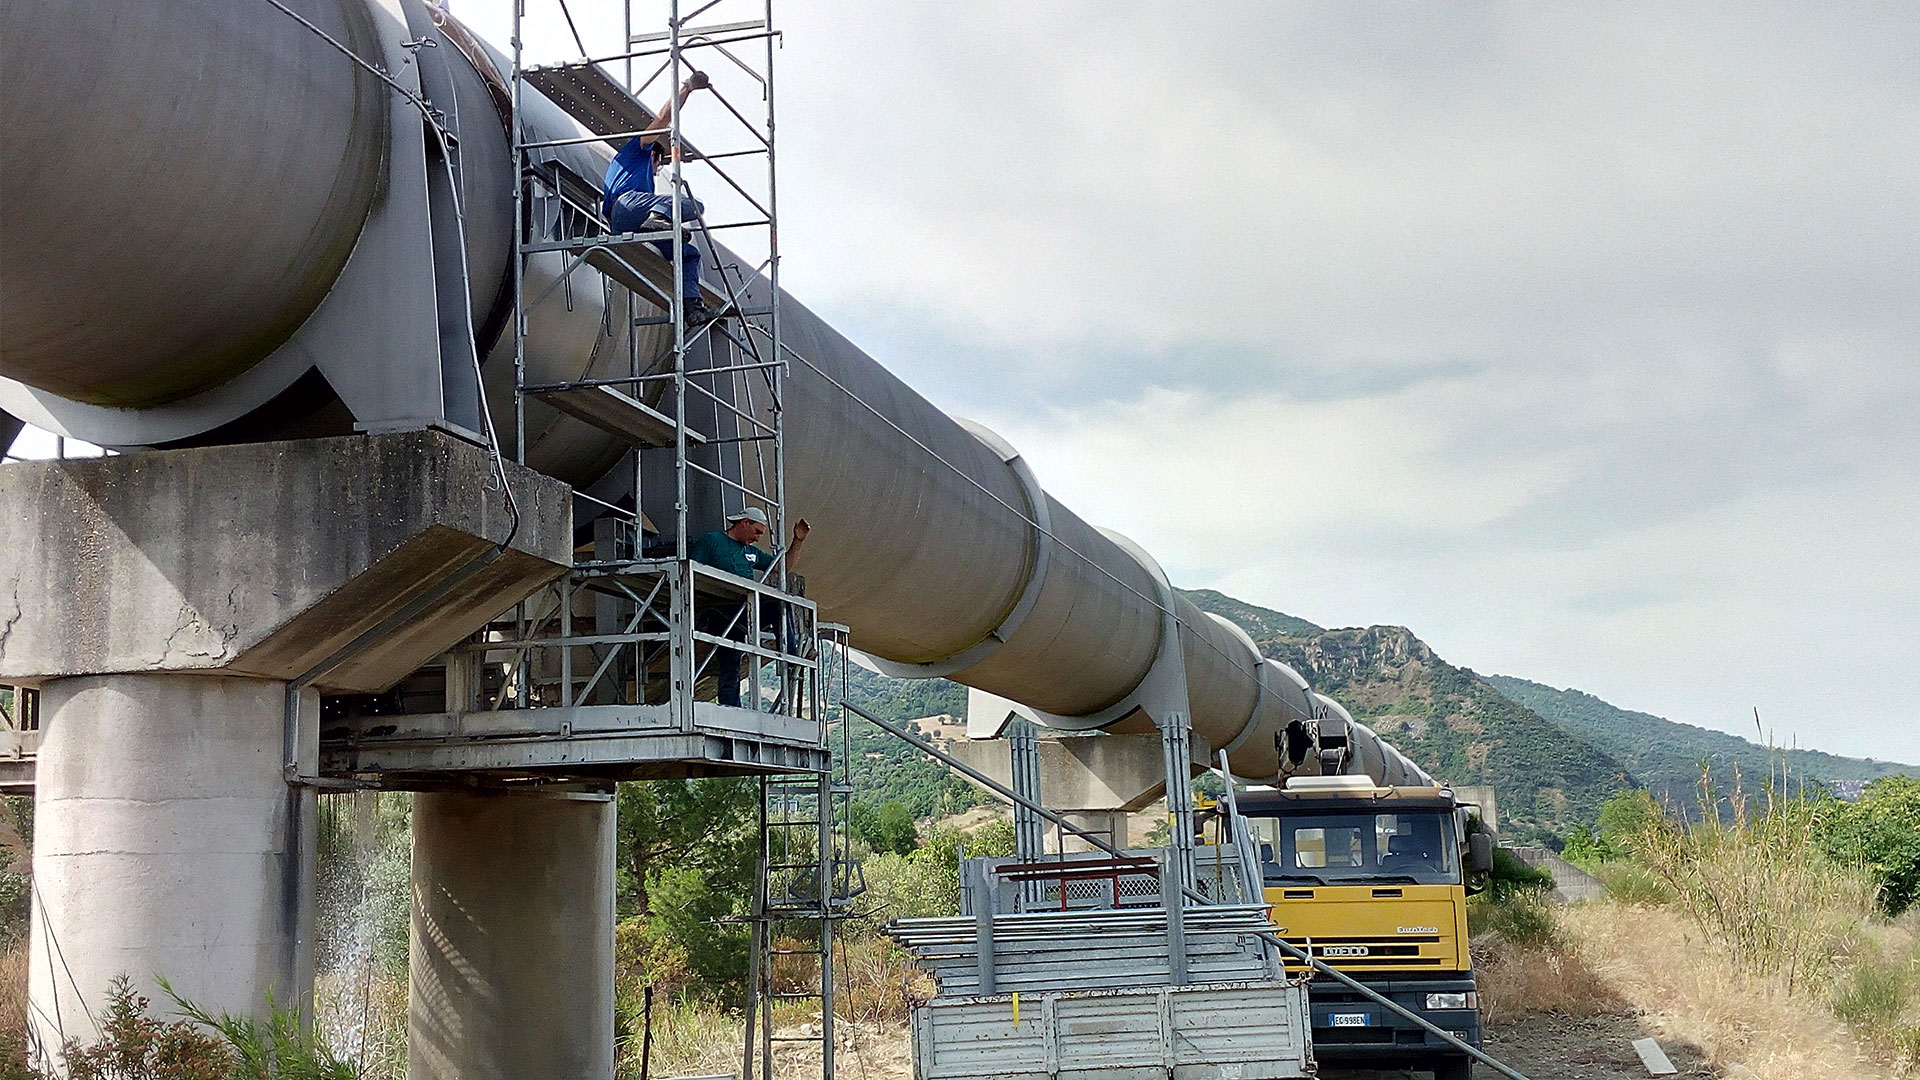 Hydro Stop socket encapsulation couplings used for repairing a leaking socket joints on the biggest pipeline in Southern Italy